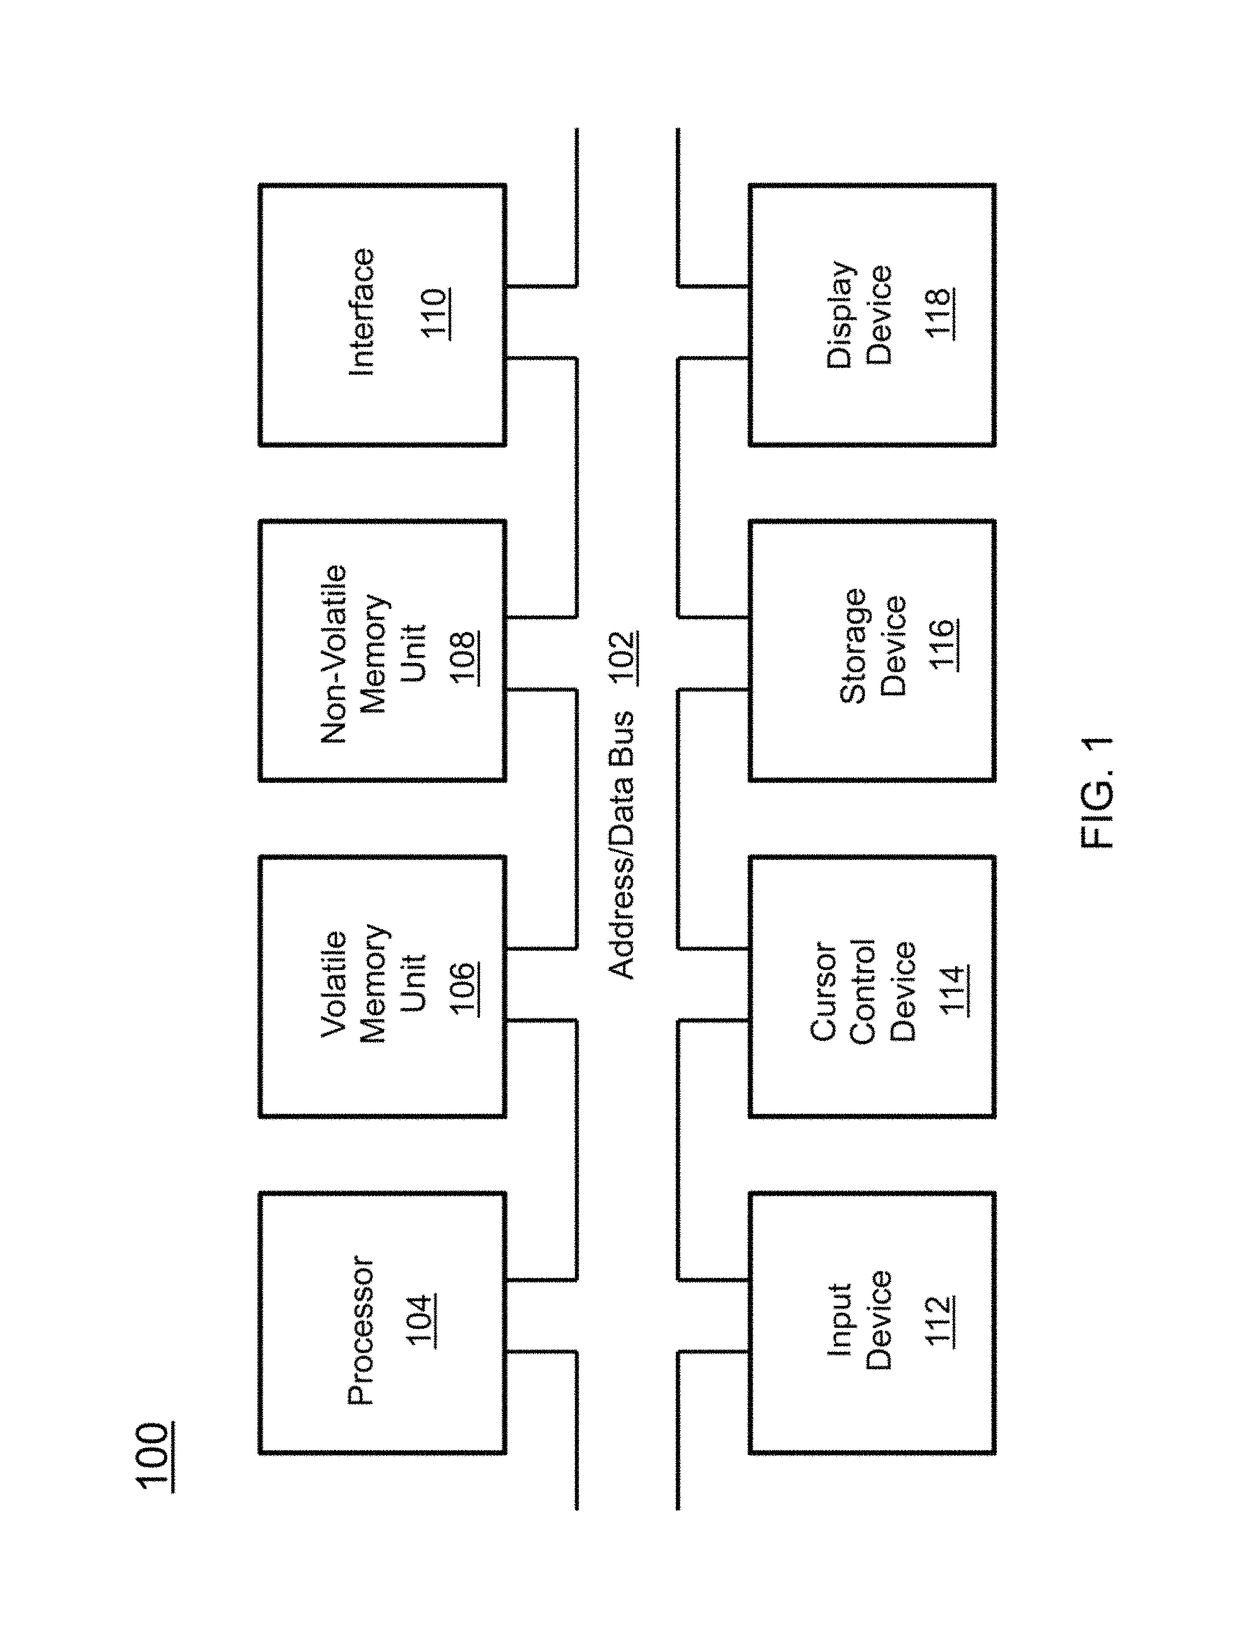 System and method to detect attacks on mobile wireless networks based on motif analysis